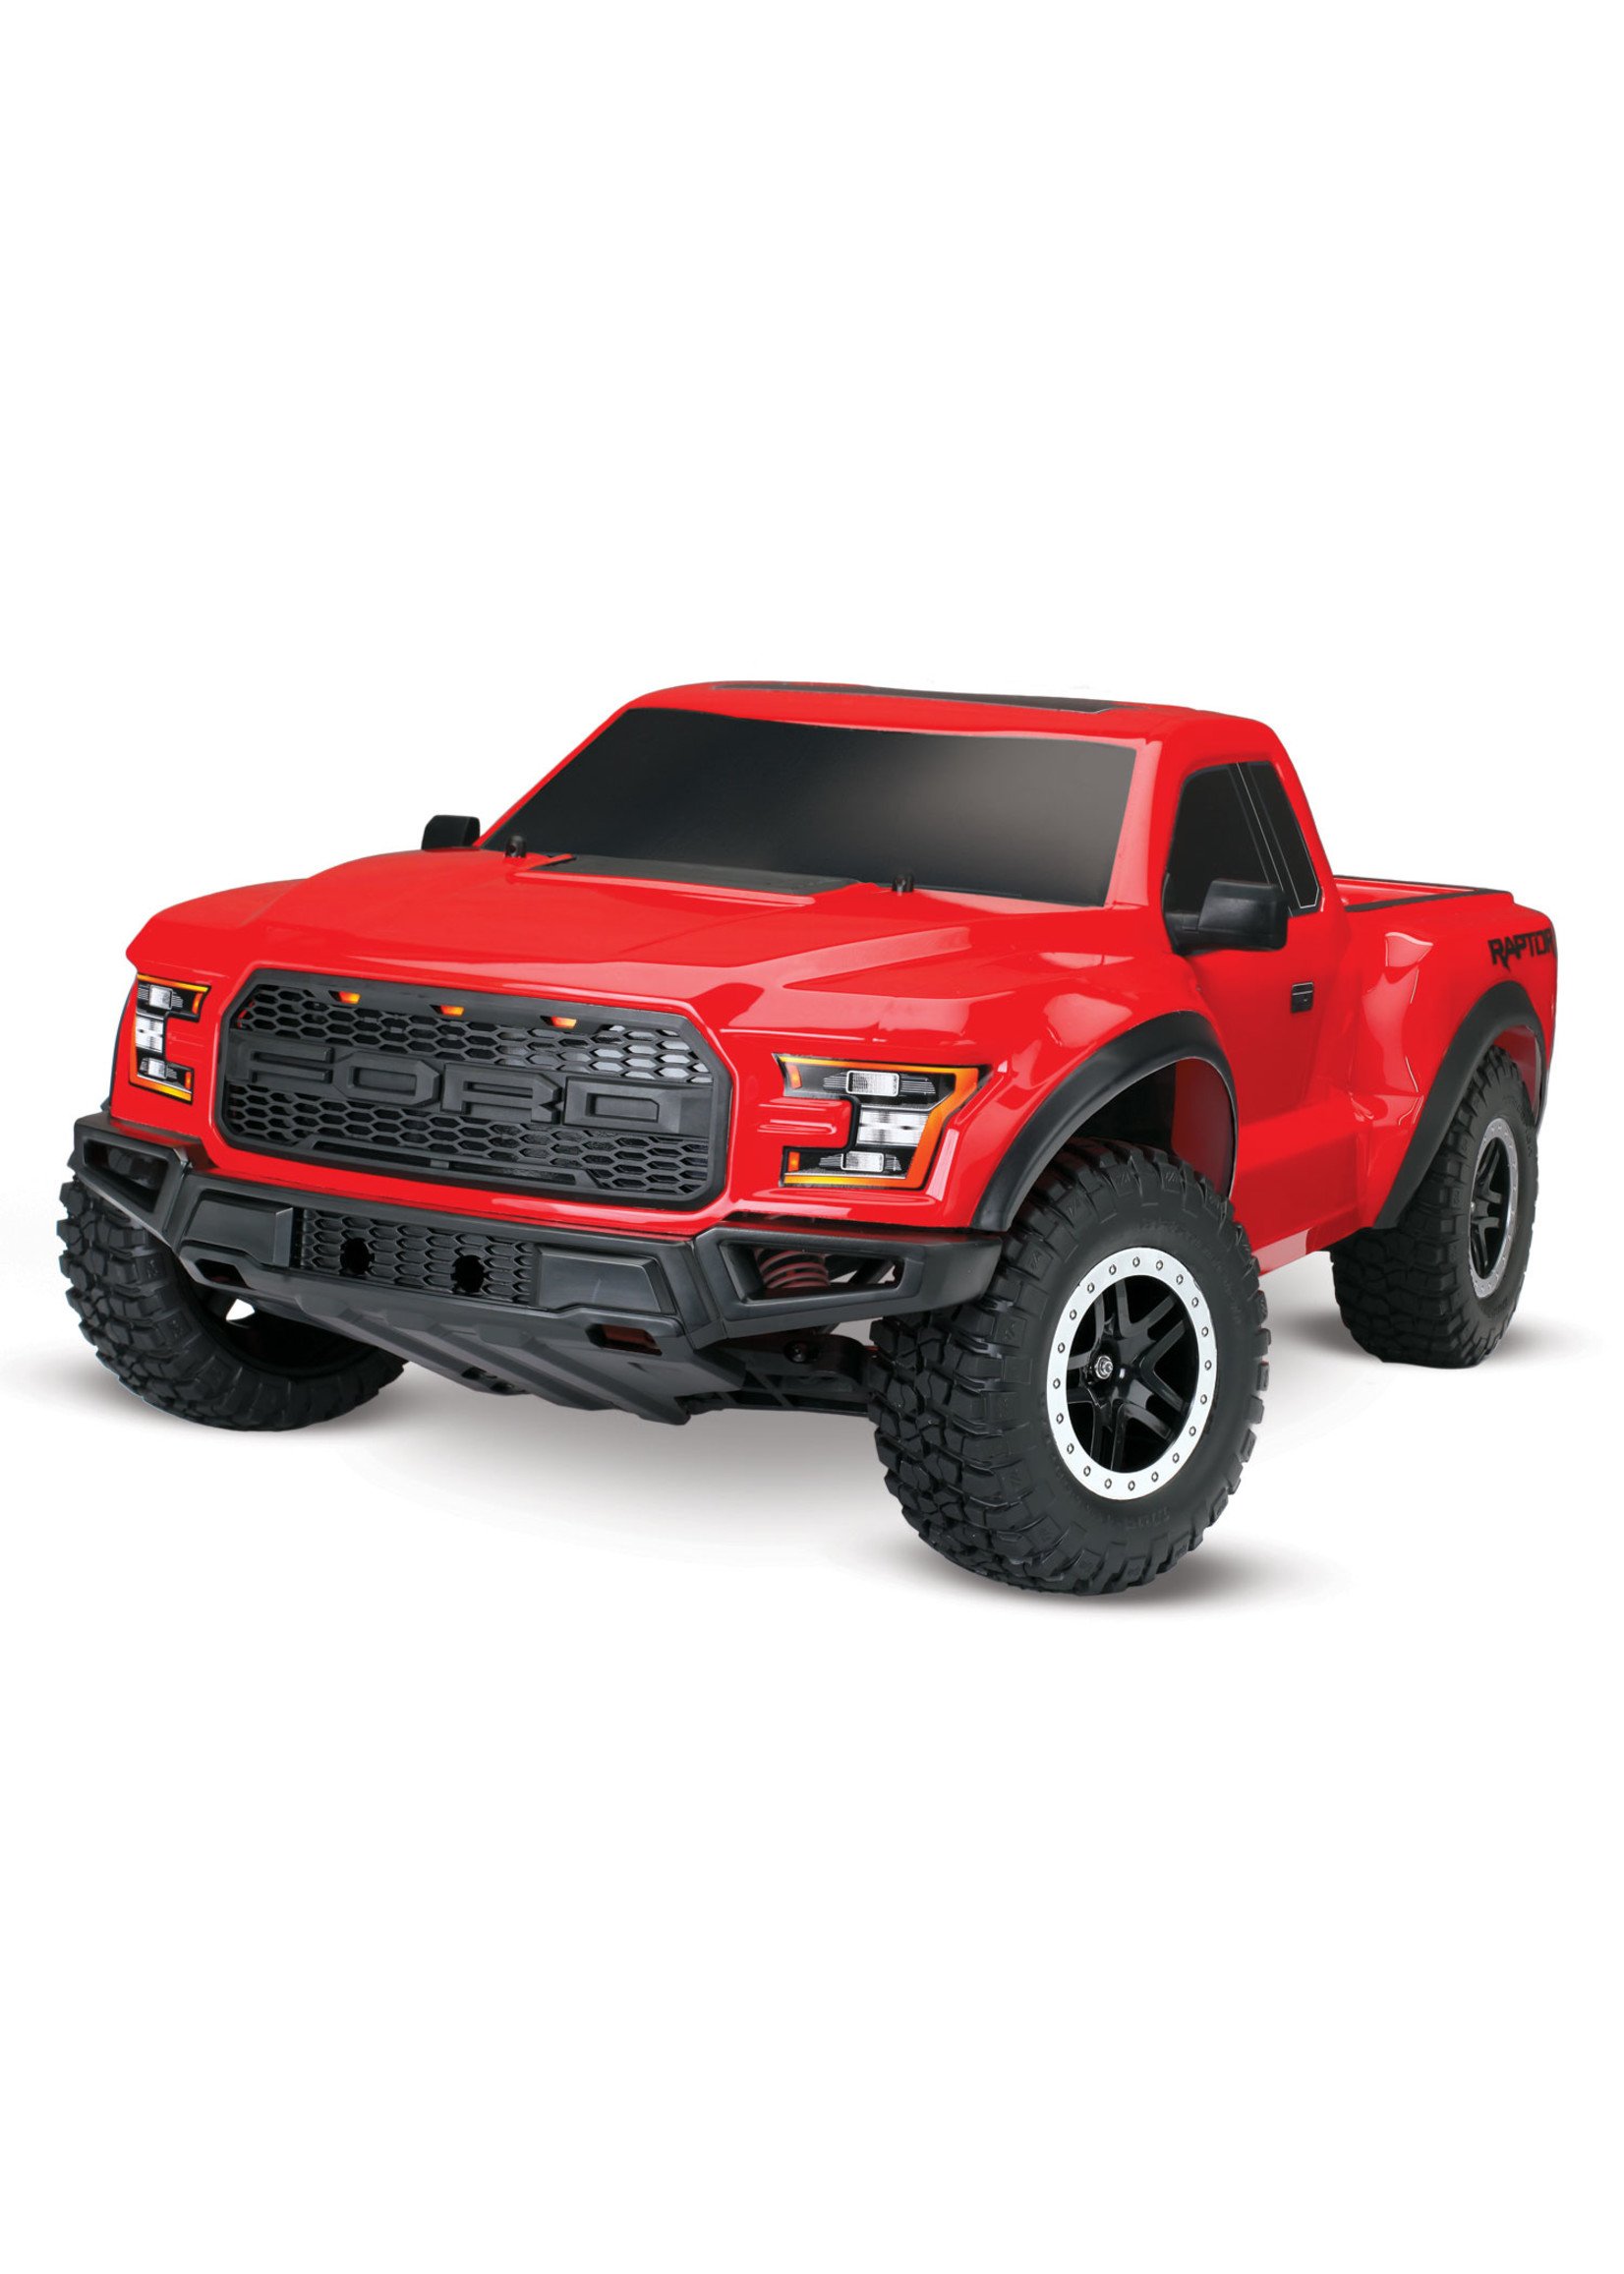 Traxxas 1/10 2017 Ford Raptor 2WD Replica Truck RTR - Red